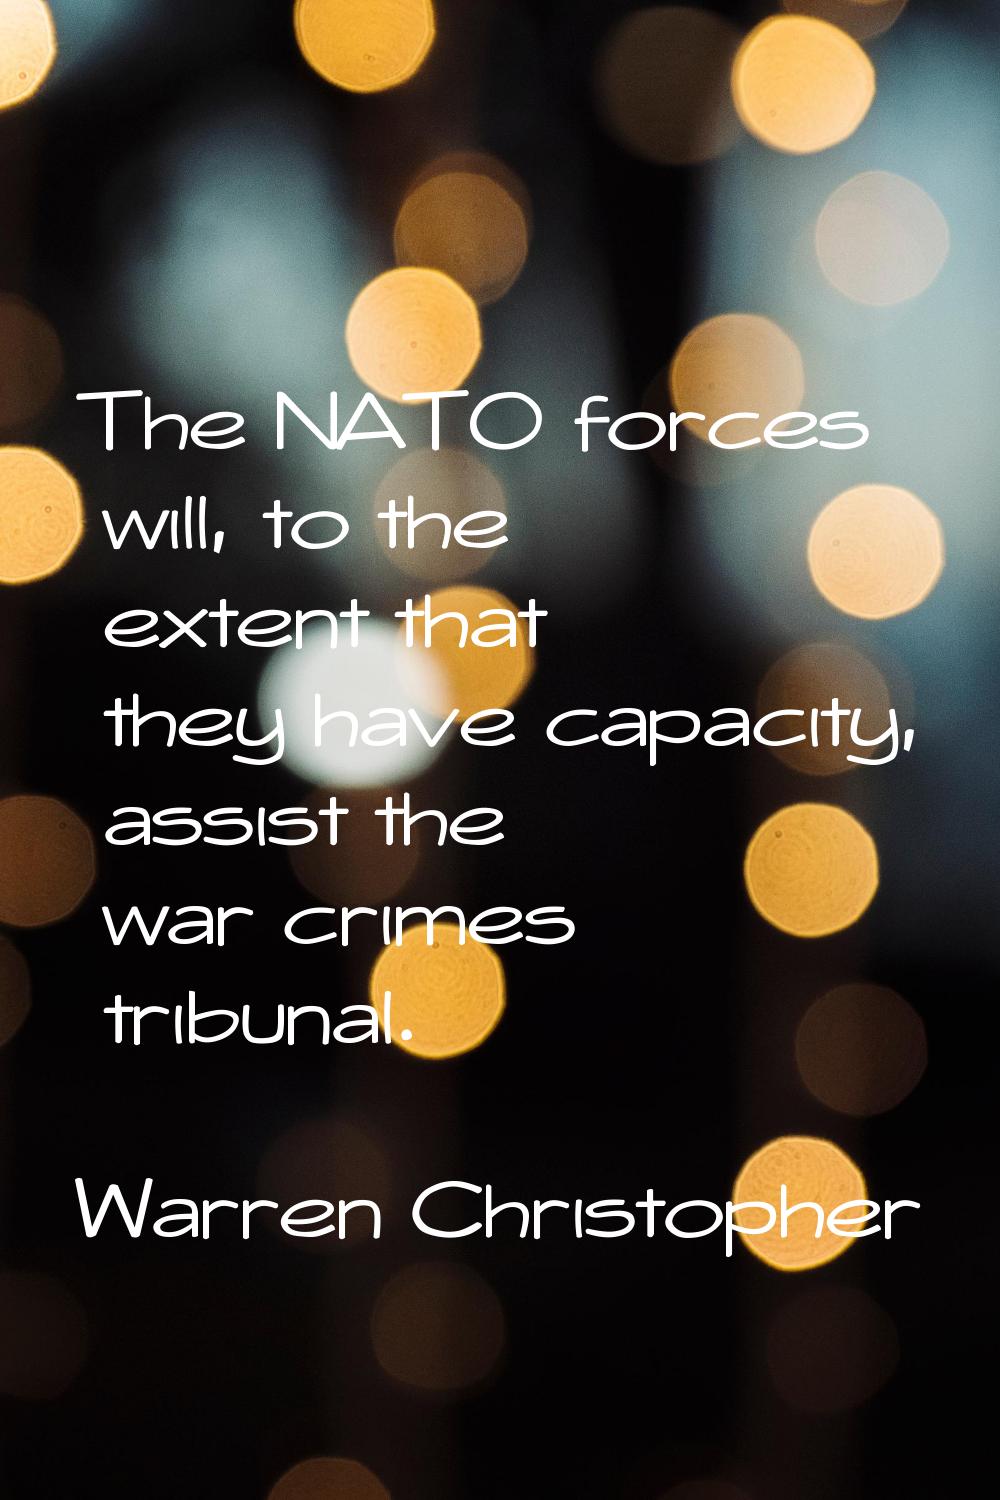 The NATO forces will, to the extent that they have capacity, assist the war crimes tribunal.